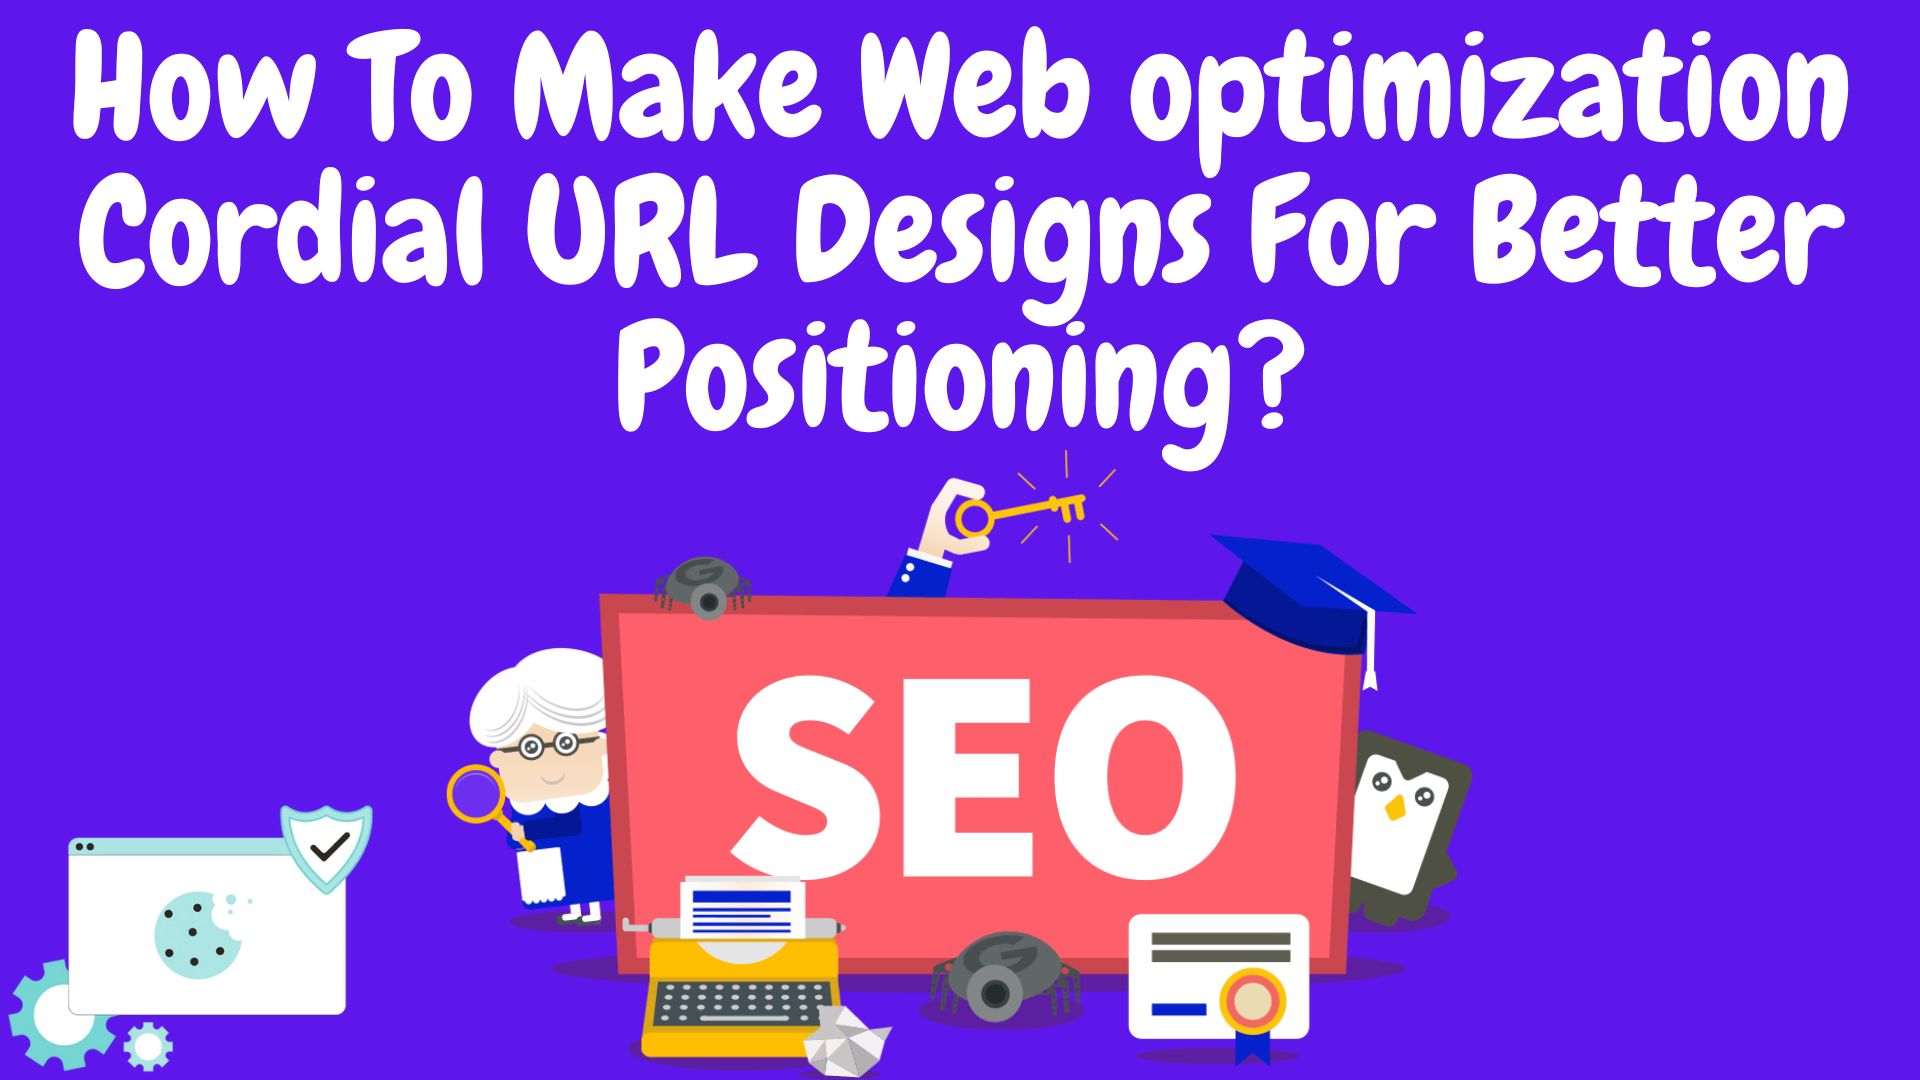 How To Make Web Optimization Cordial Url Designs For Better Positioning?